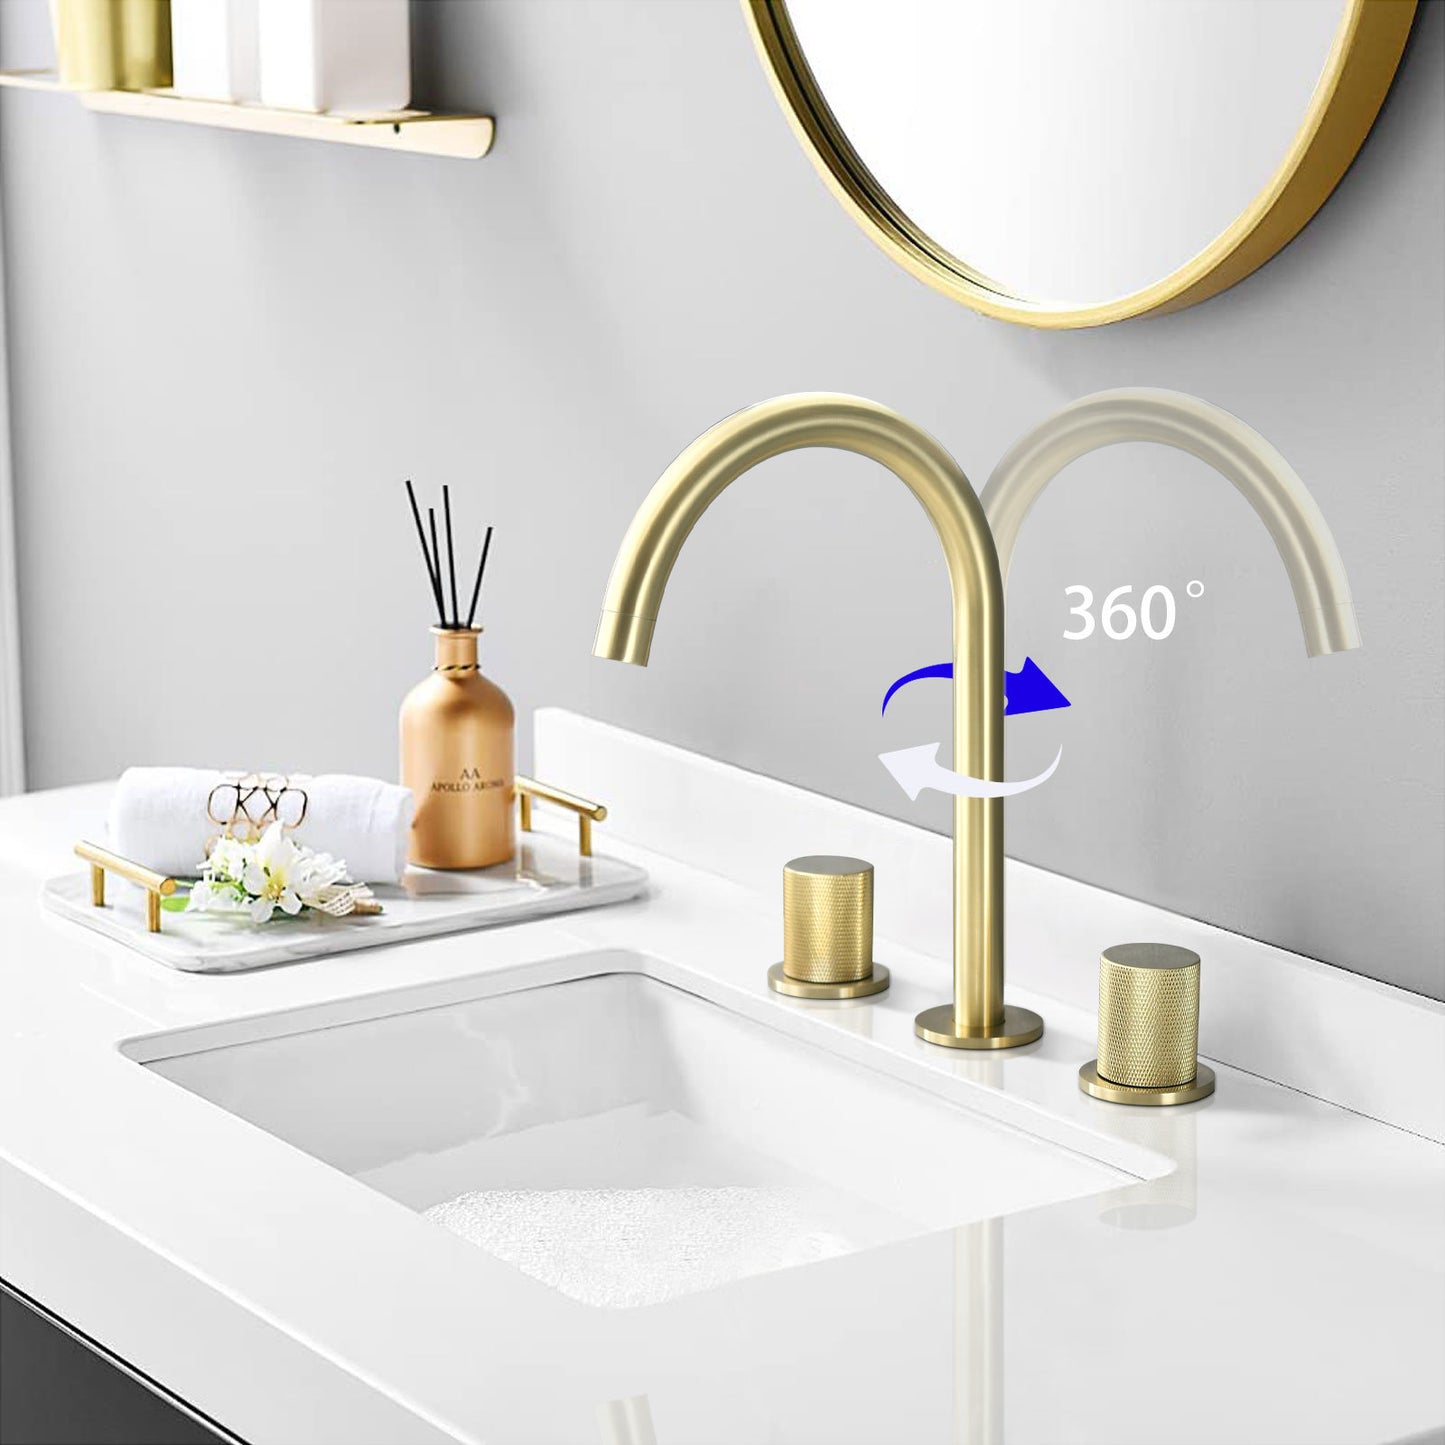 AvaMalis A|M Aquae Two Handles Widespread 8 Inch Bathroom Faucet, Brushed Golden